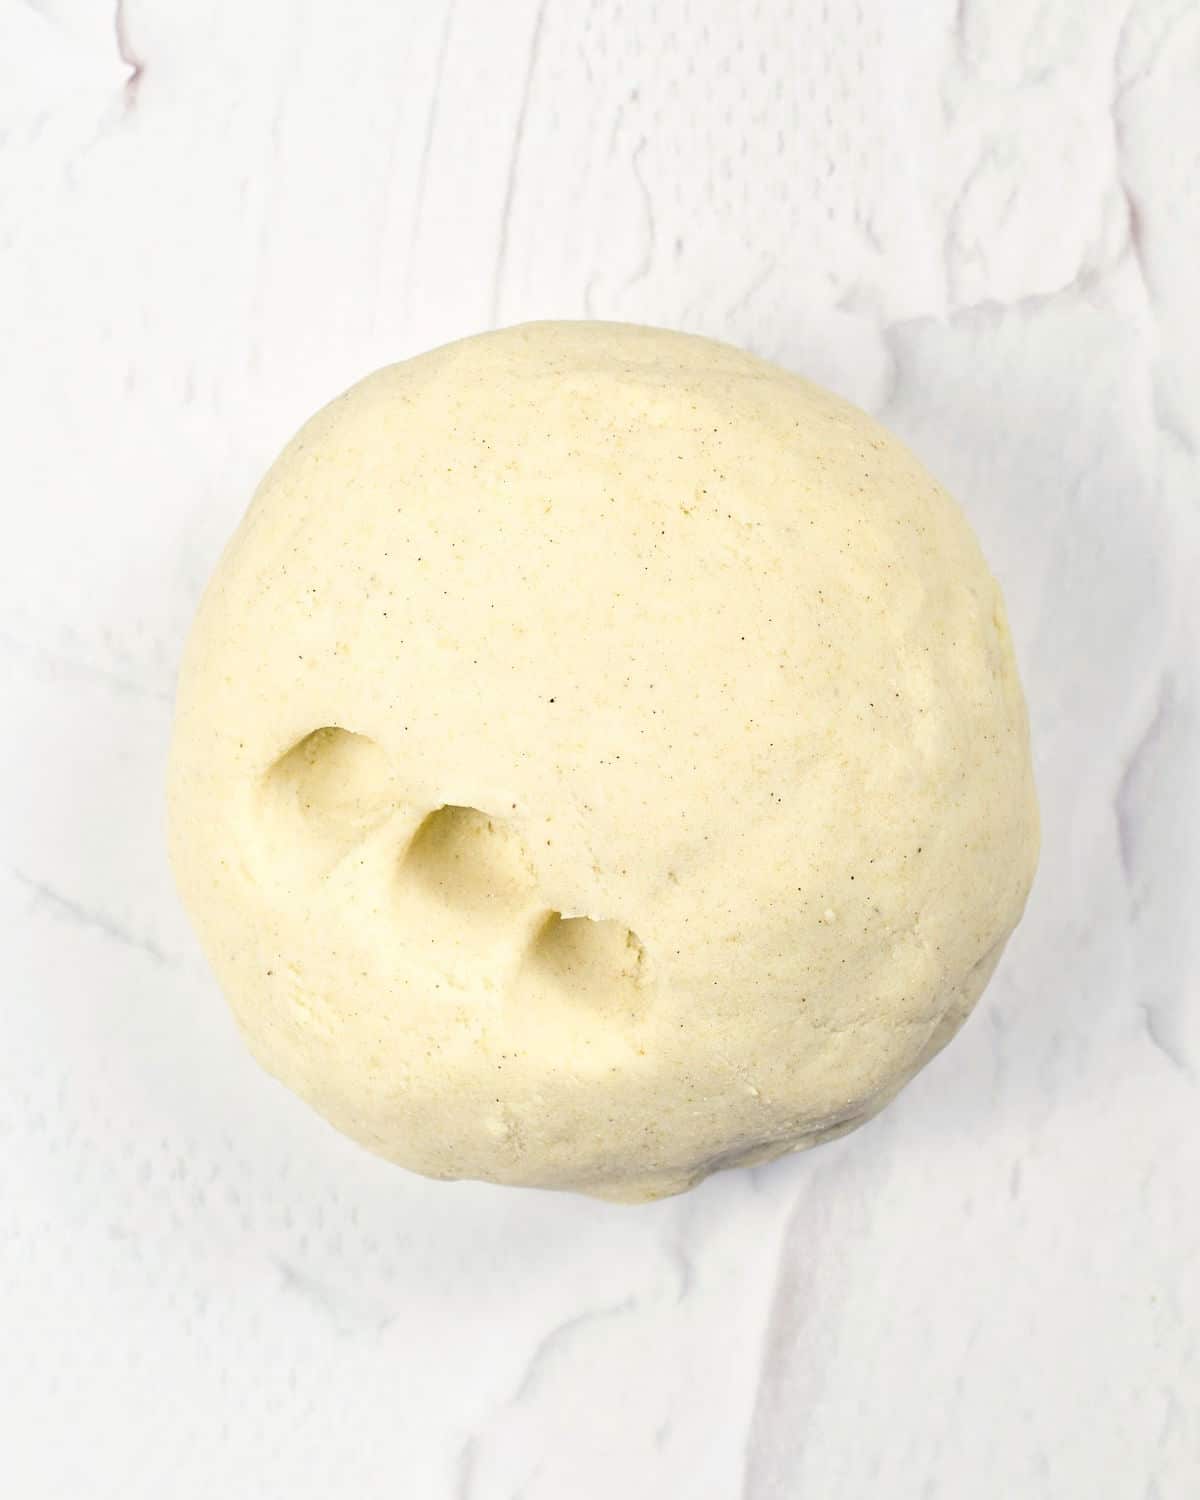 Ball of tortilla dough with three indentations on a textured white greyish surface.